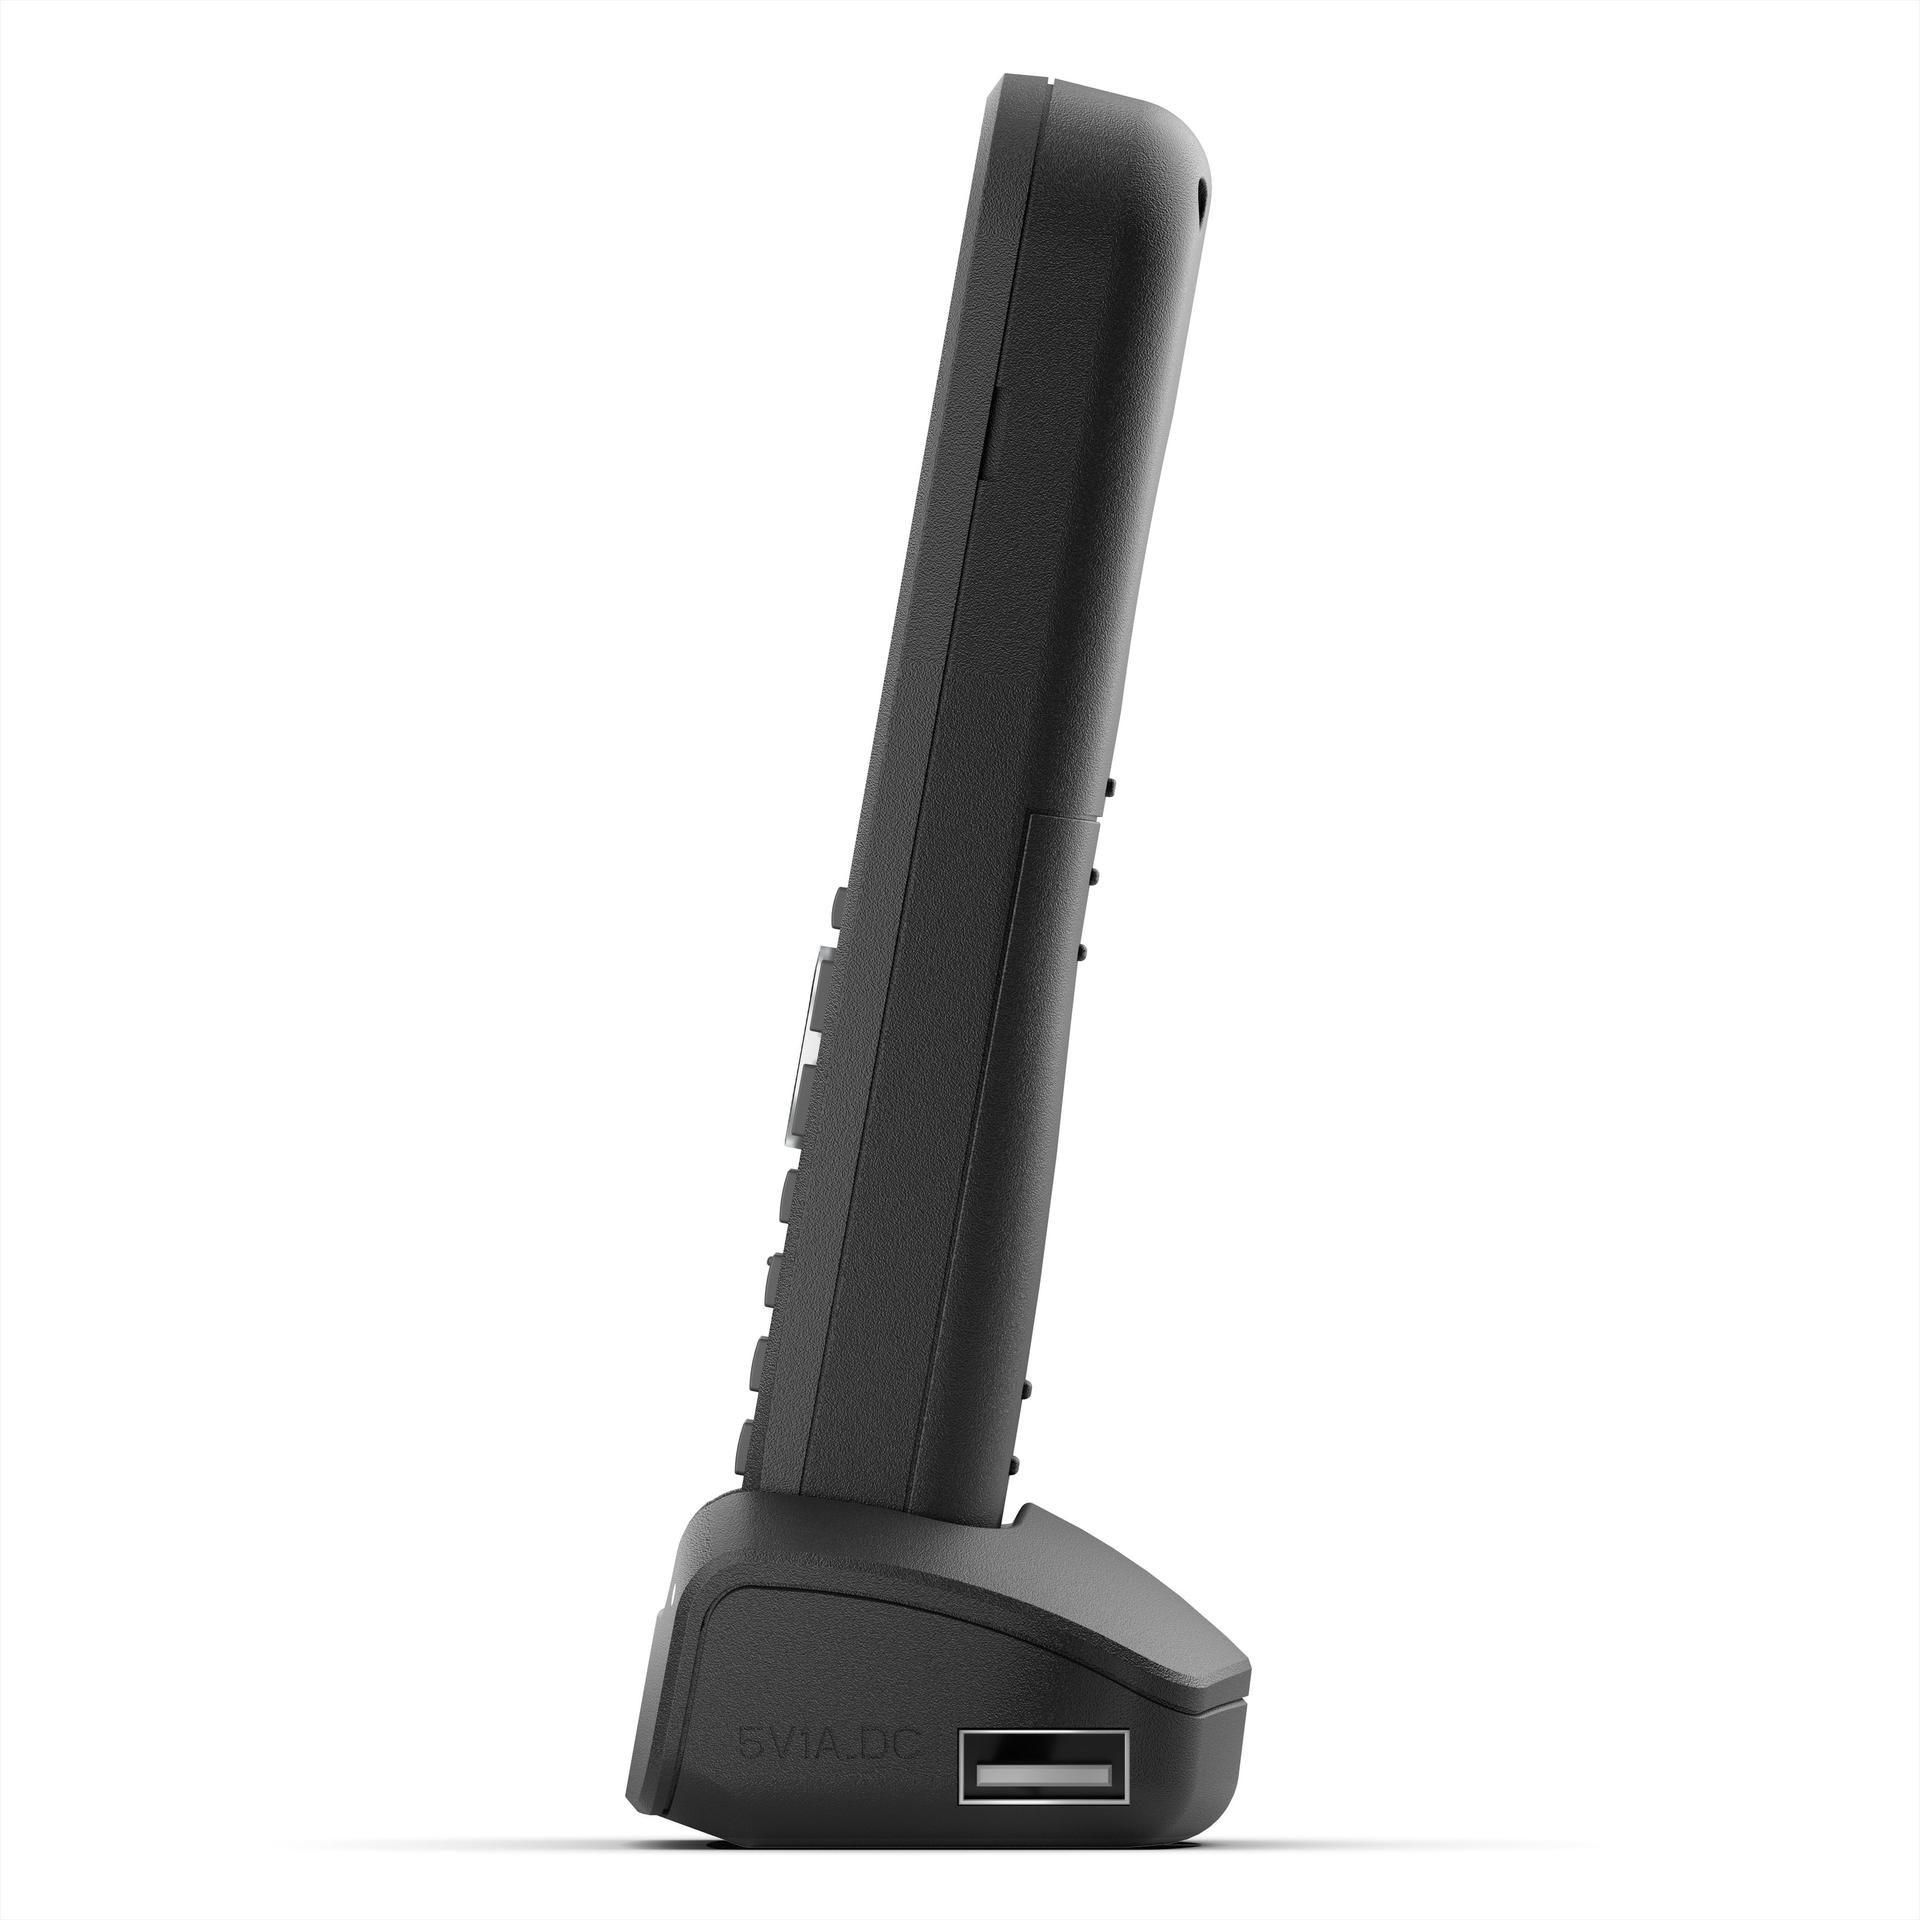 Snom M30 Multi-cell DECT Phone Side View